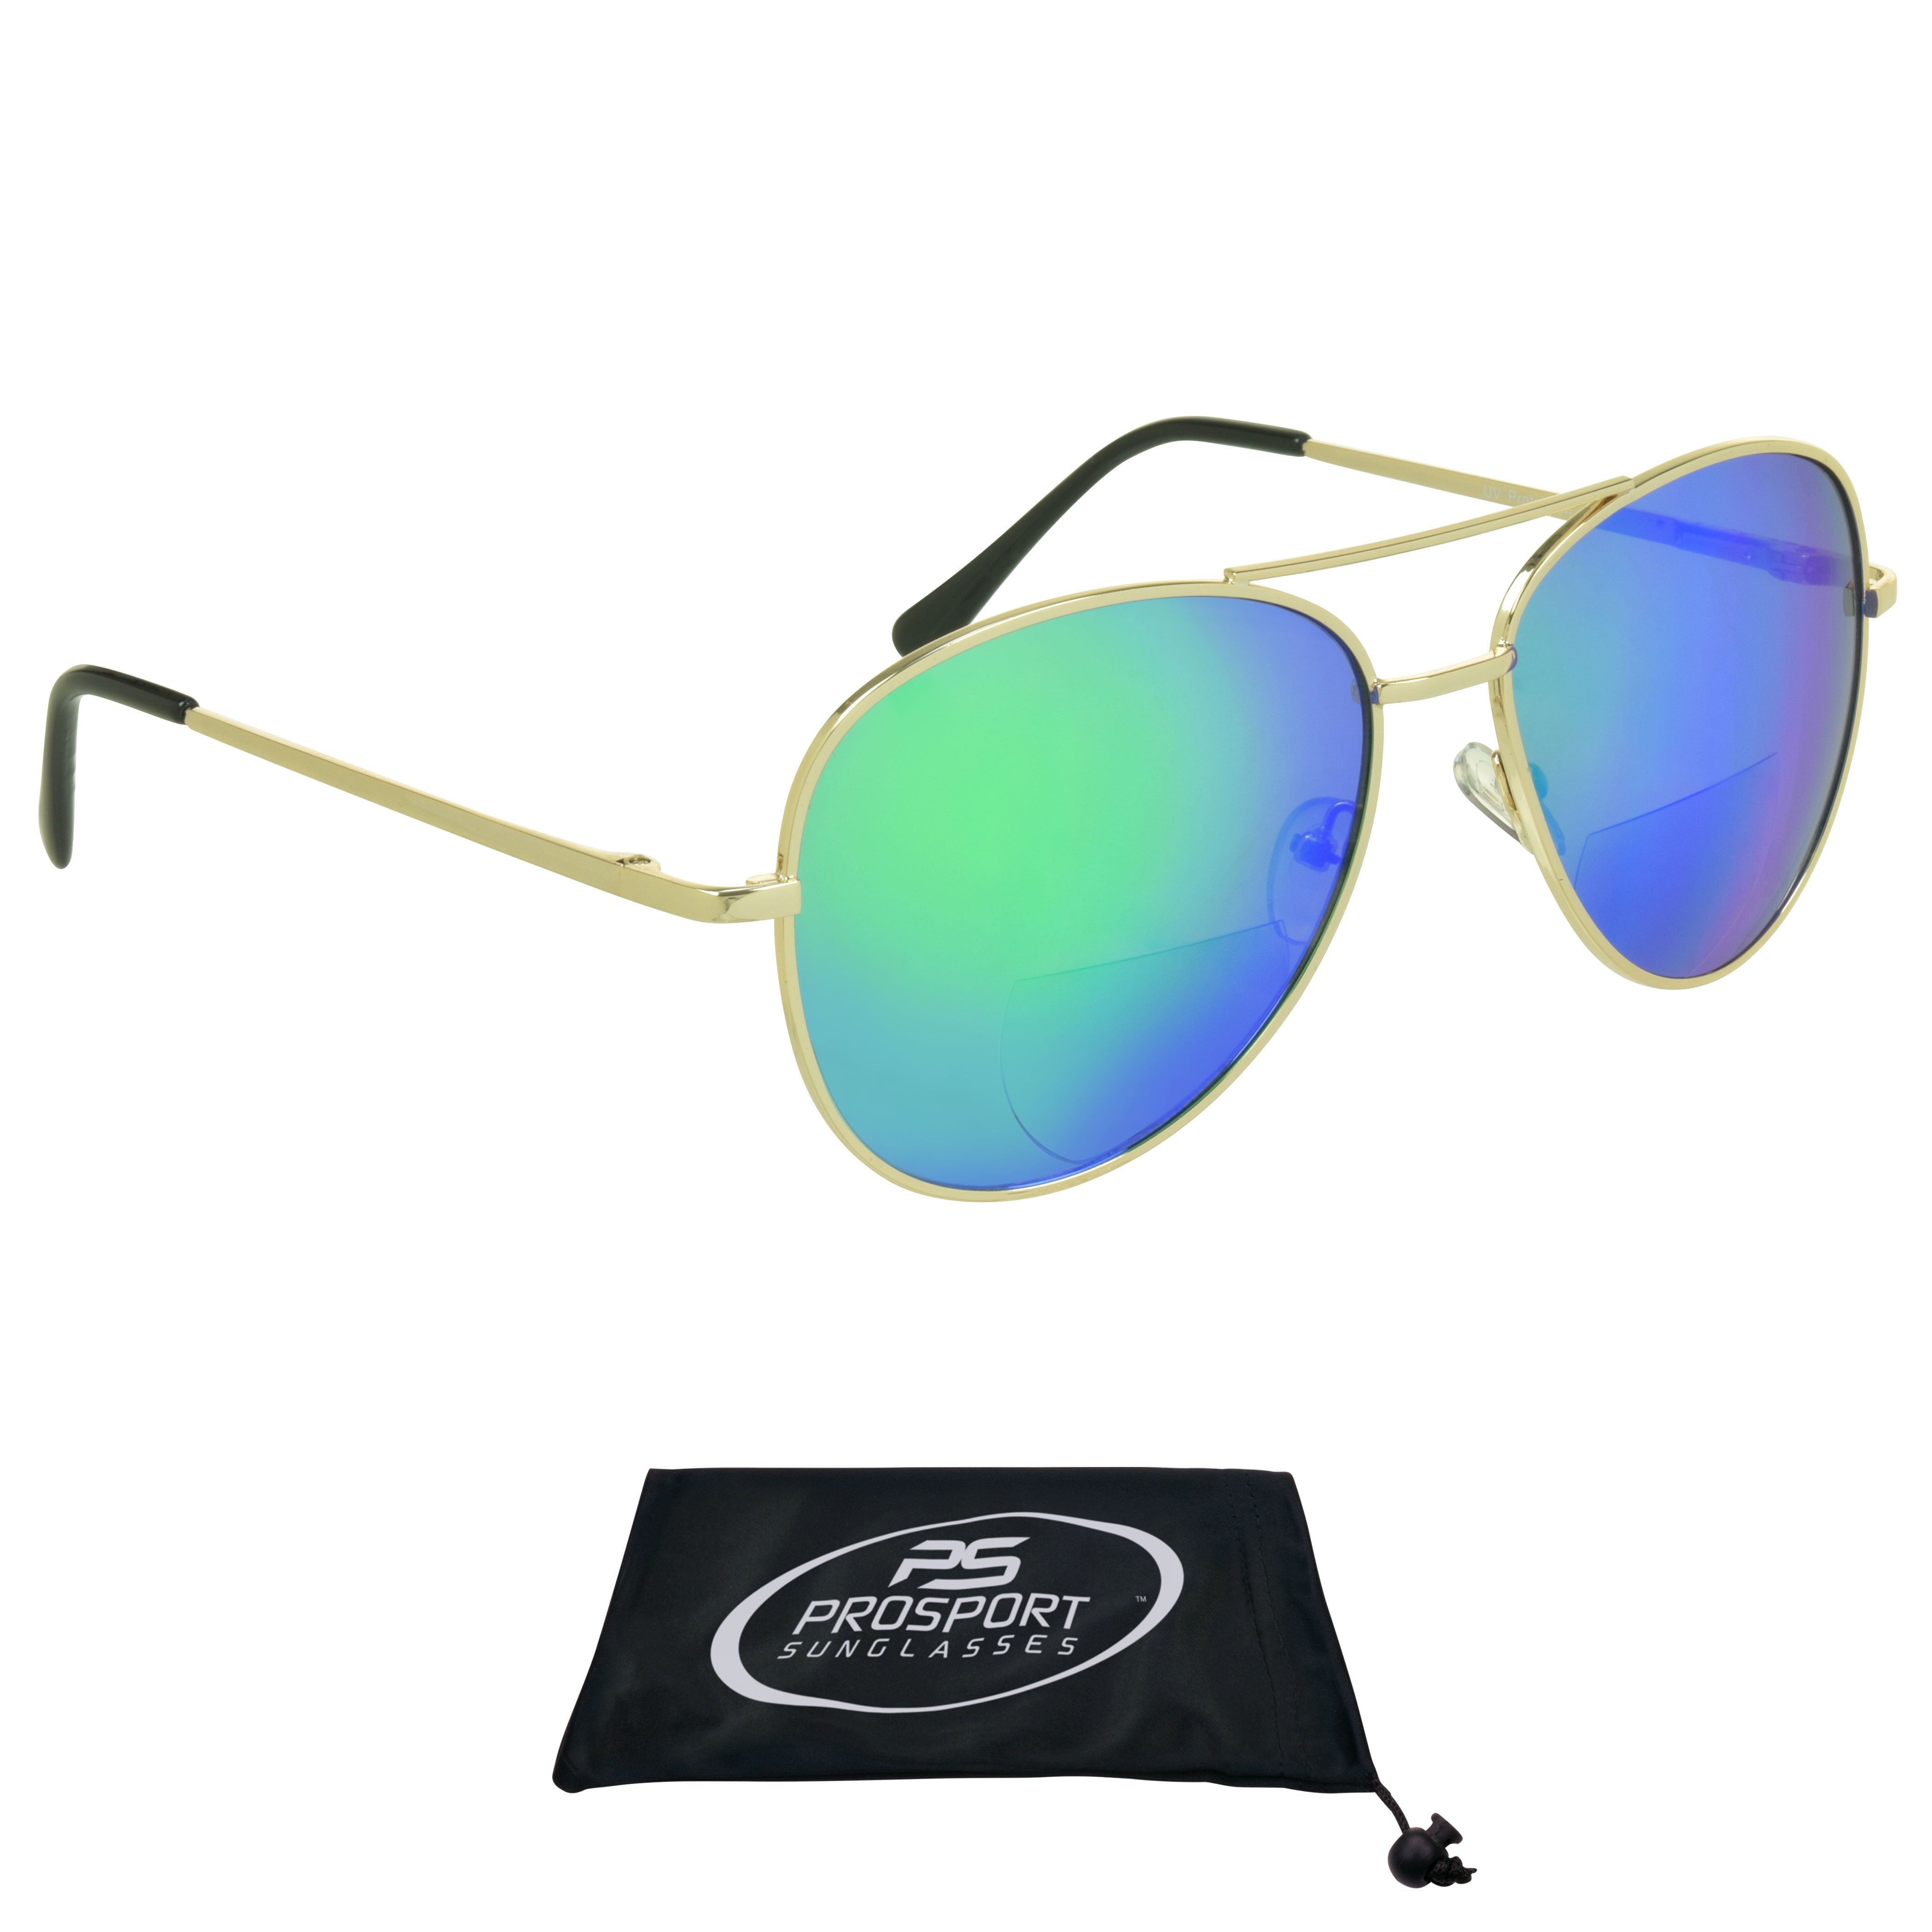 Amazon.com: Mirrored Aviator Sunglasses. Orange, Blue, Green, Gold or  Silver Flashed Mirror Lens. : Clothing, Shoes & Jewelry